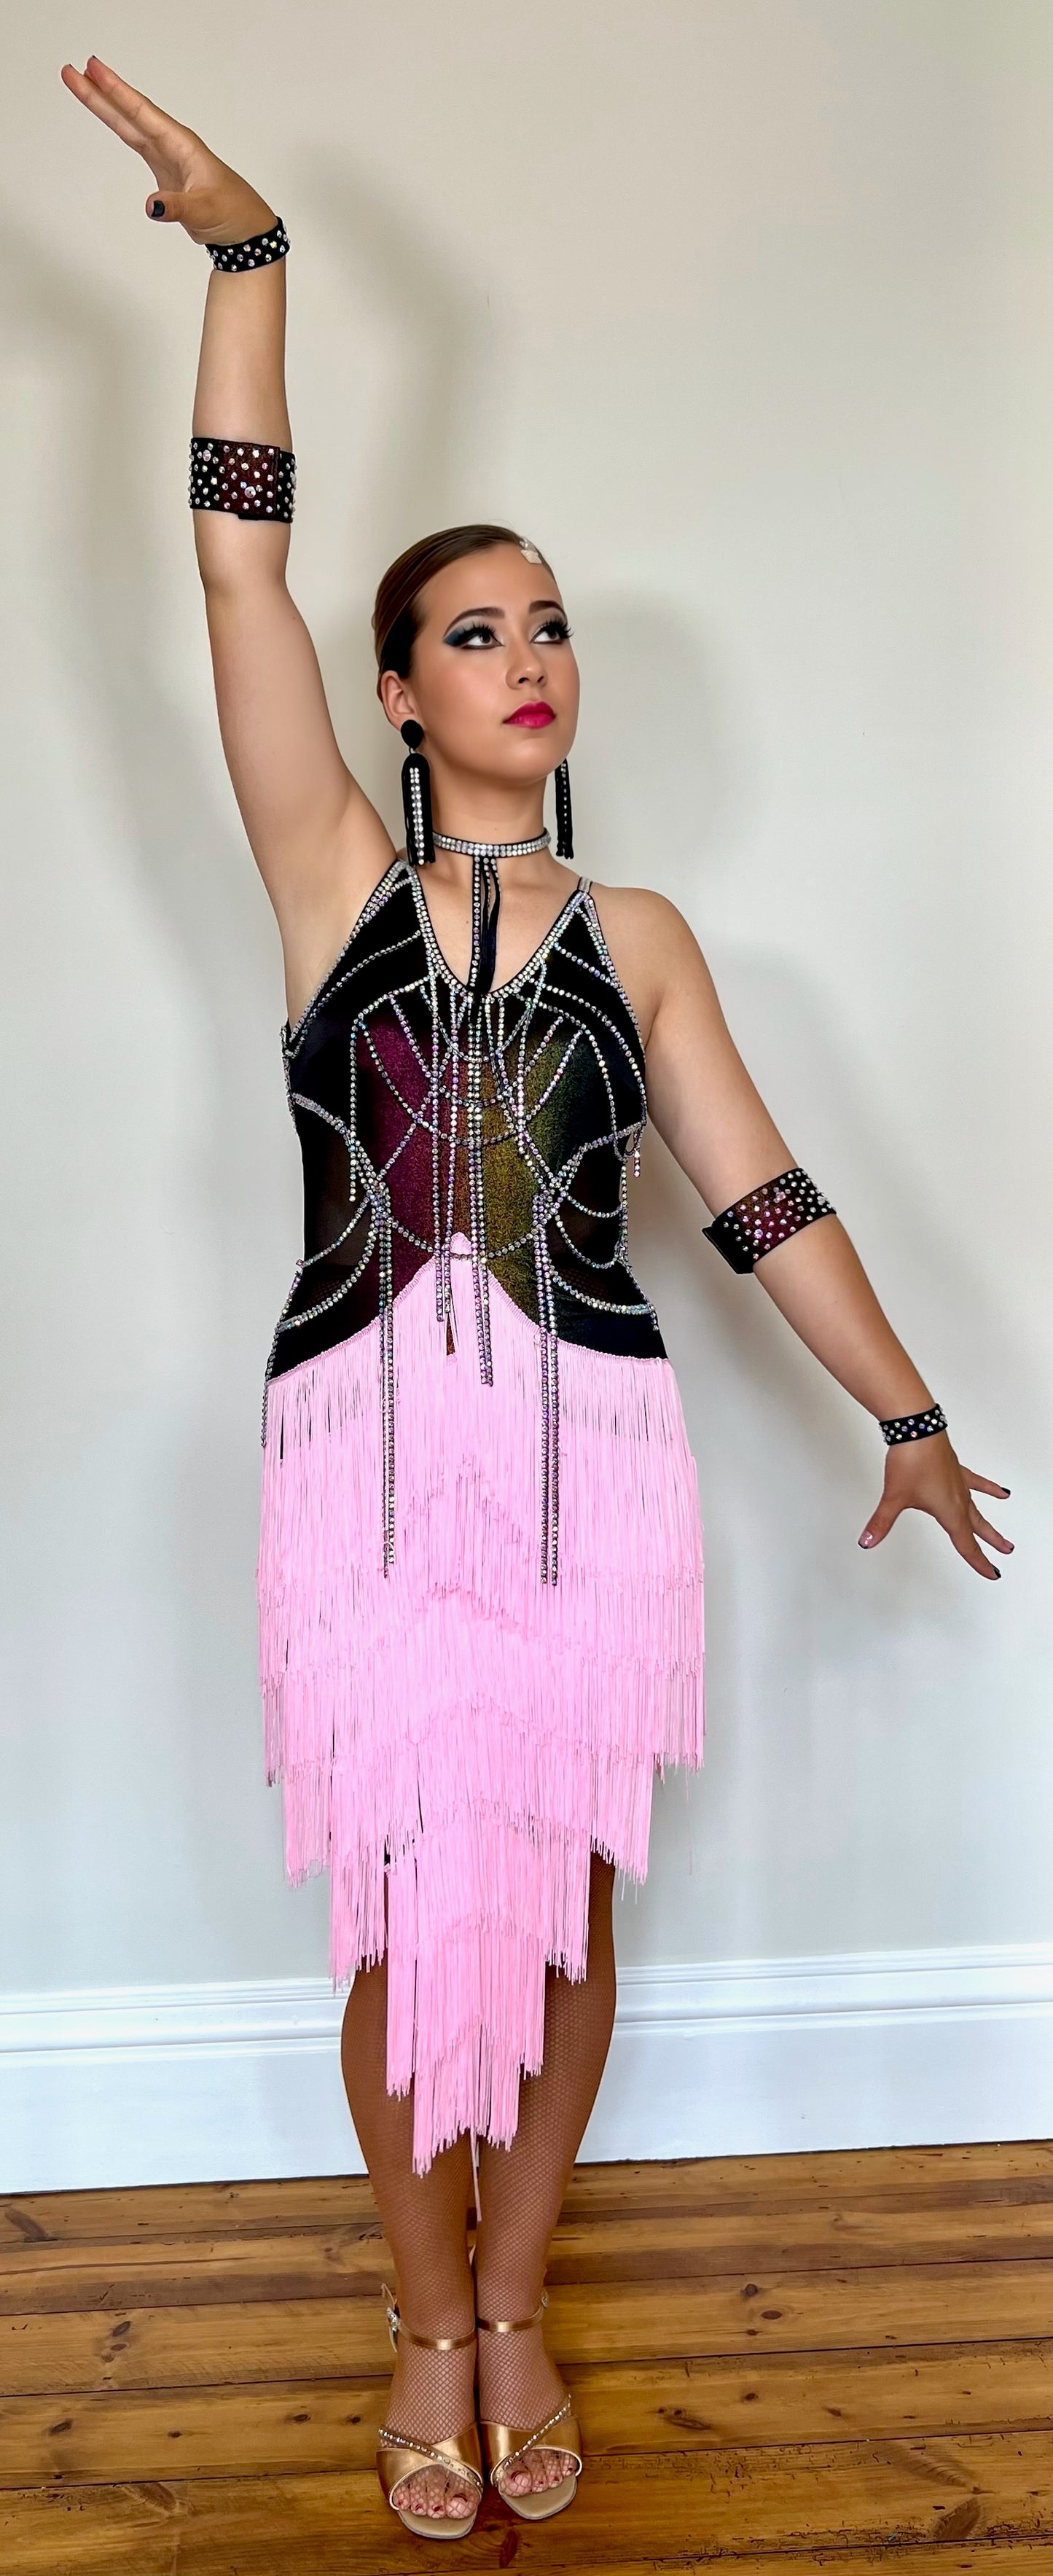 006 Multi Coloured metallic bodice with hanging material droppers. All stoned in AB with pale pink multi layered fringe skirt.